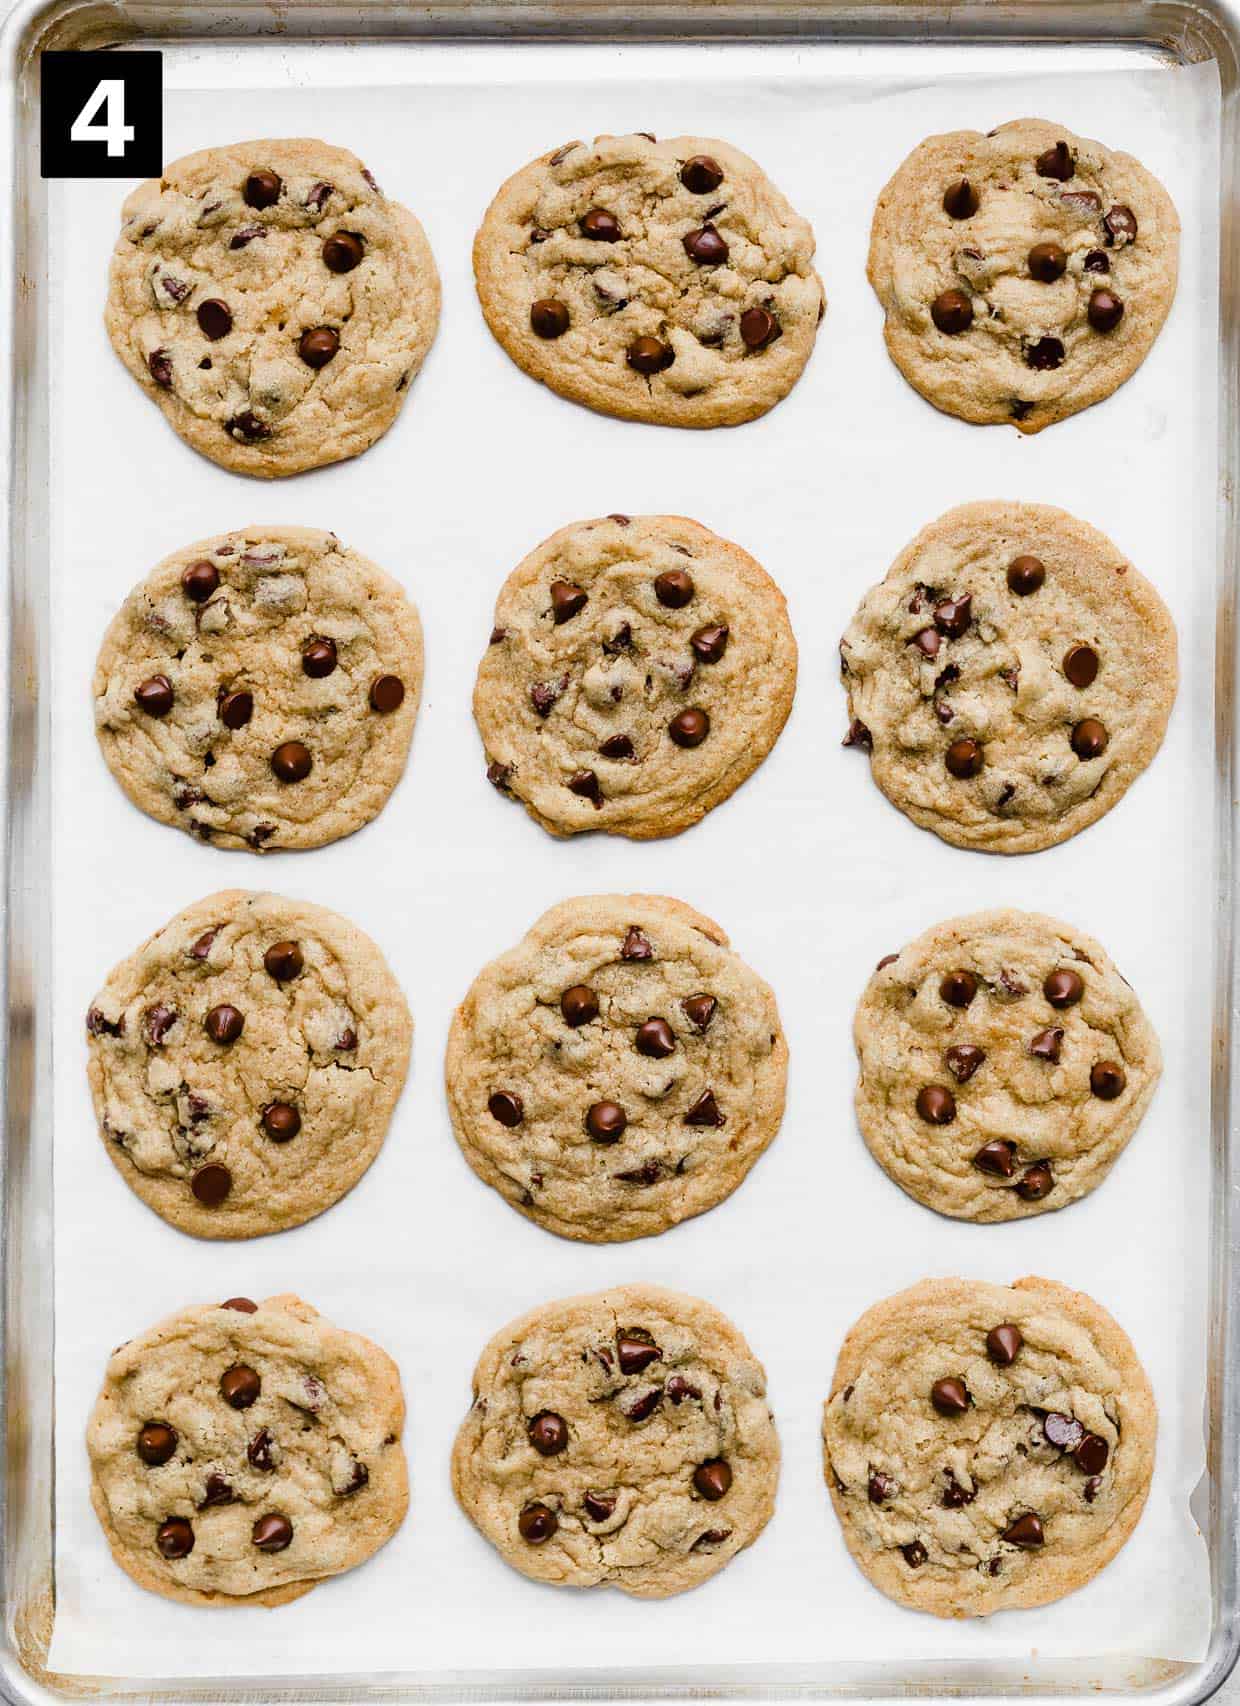 Twelve baked Tahini Chocolate Chip Cookies on a white parchment lined baking sheet.